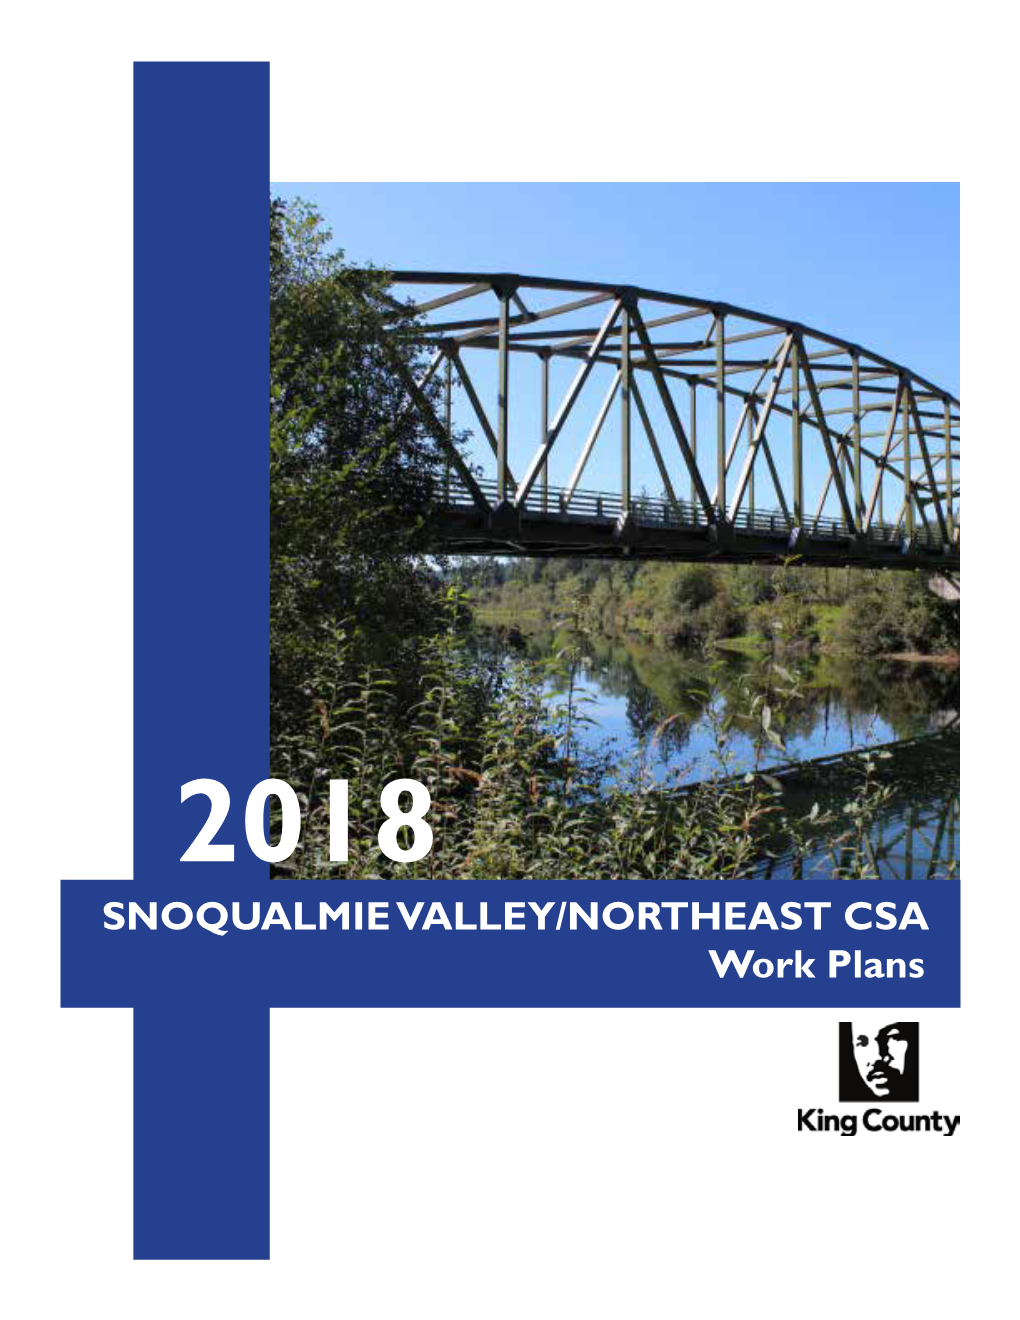 SNOQUALMIE VALLEY/NORTHEAST CSA Work Plans Community Service Areas - Snoqualmie NE King County